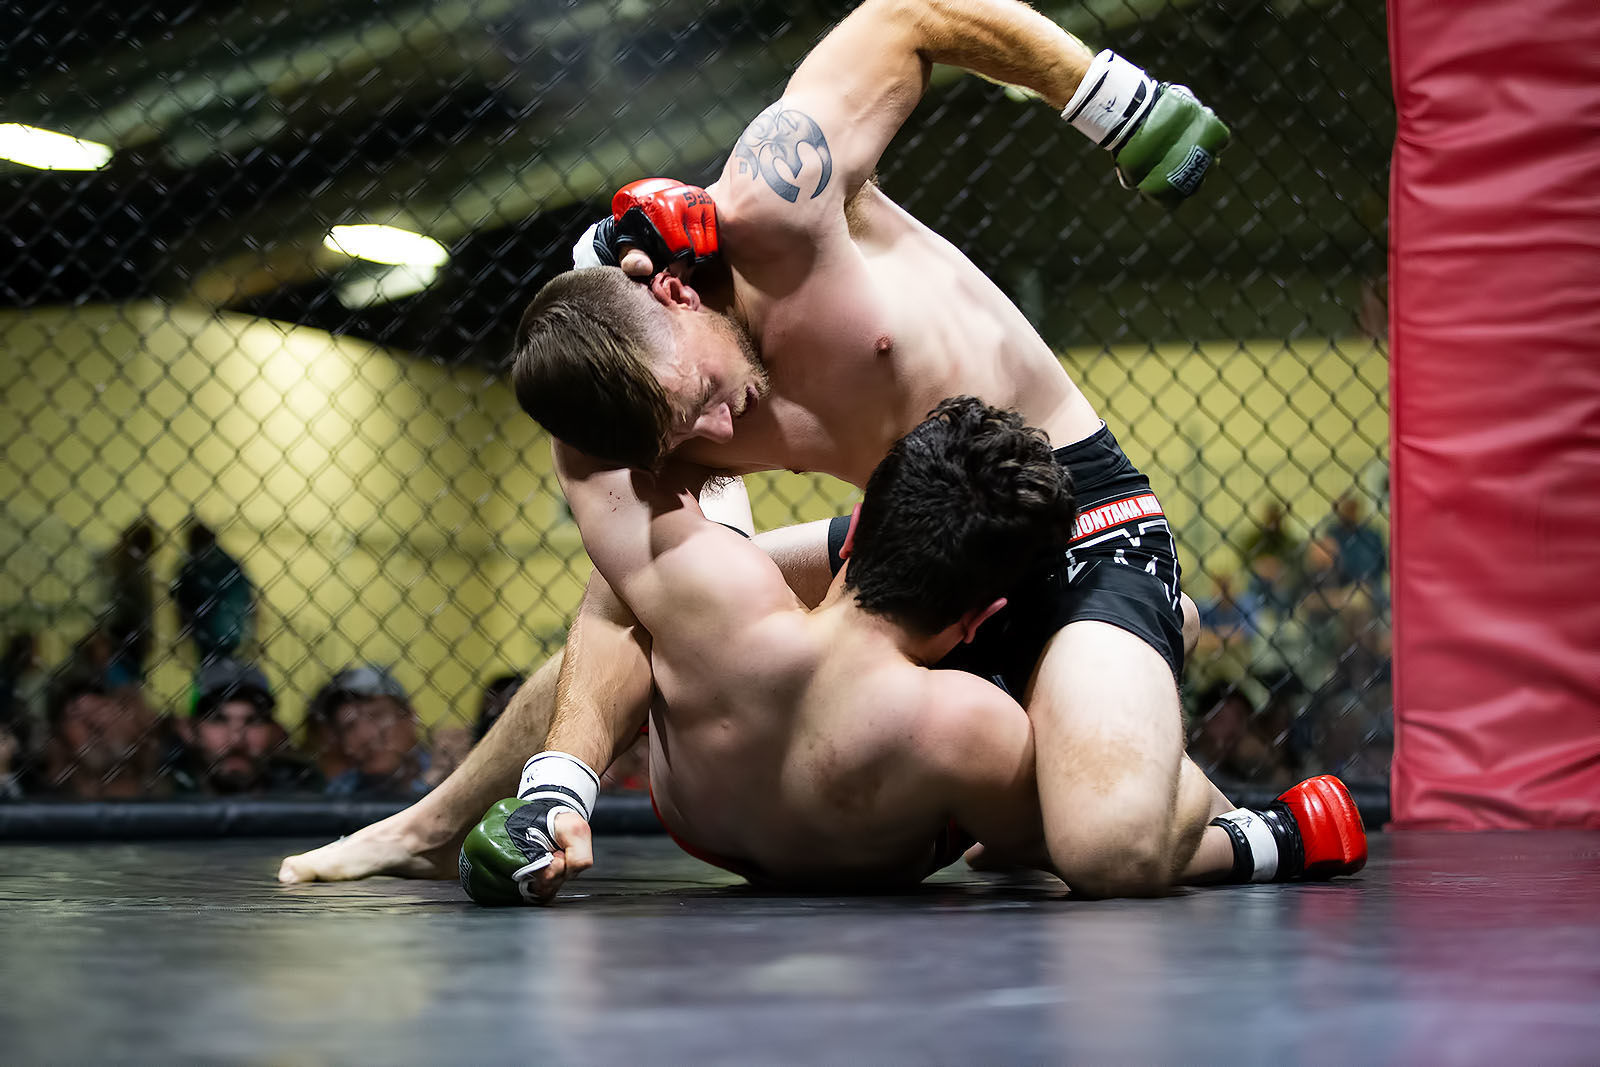 insurance policies for amateur mma fighters